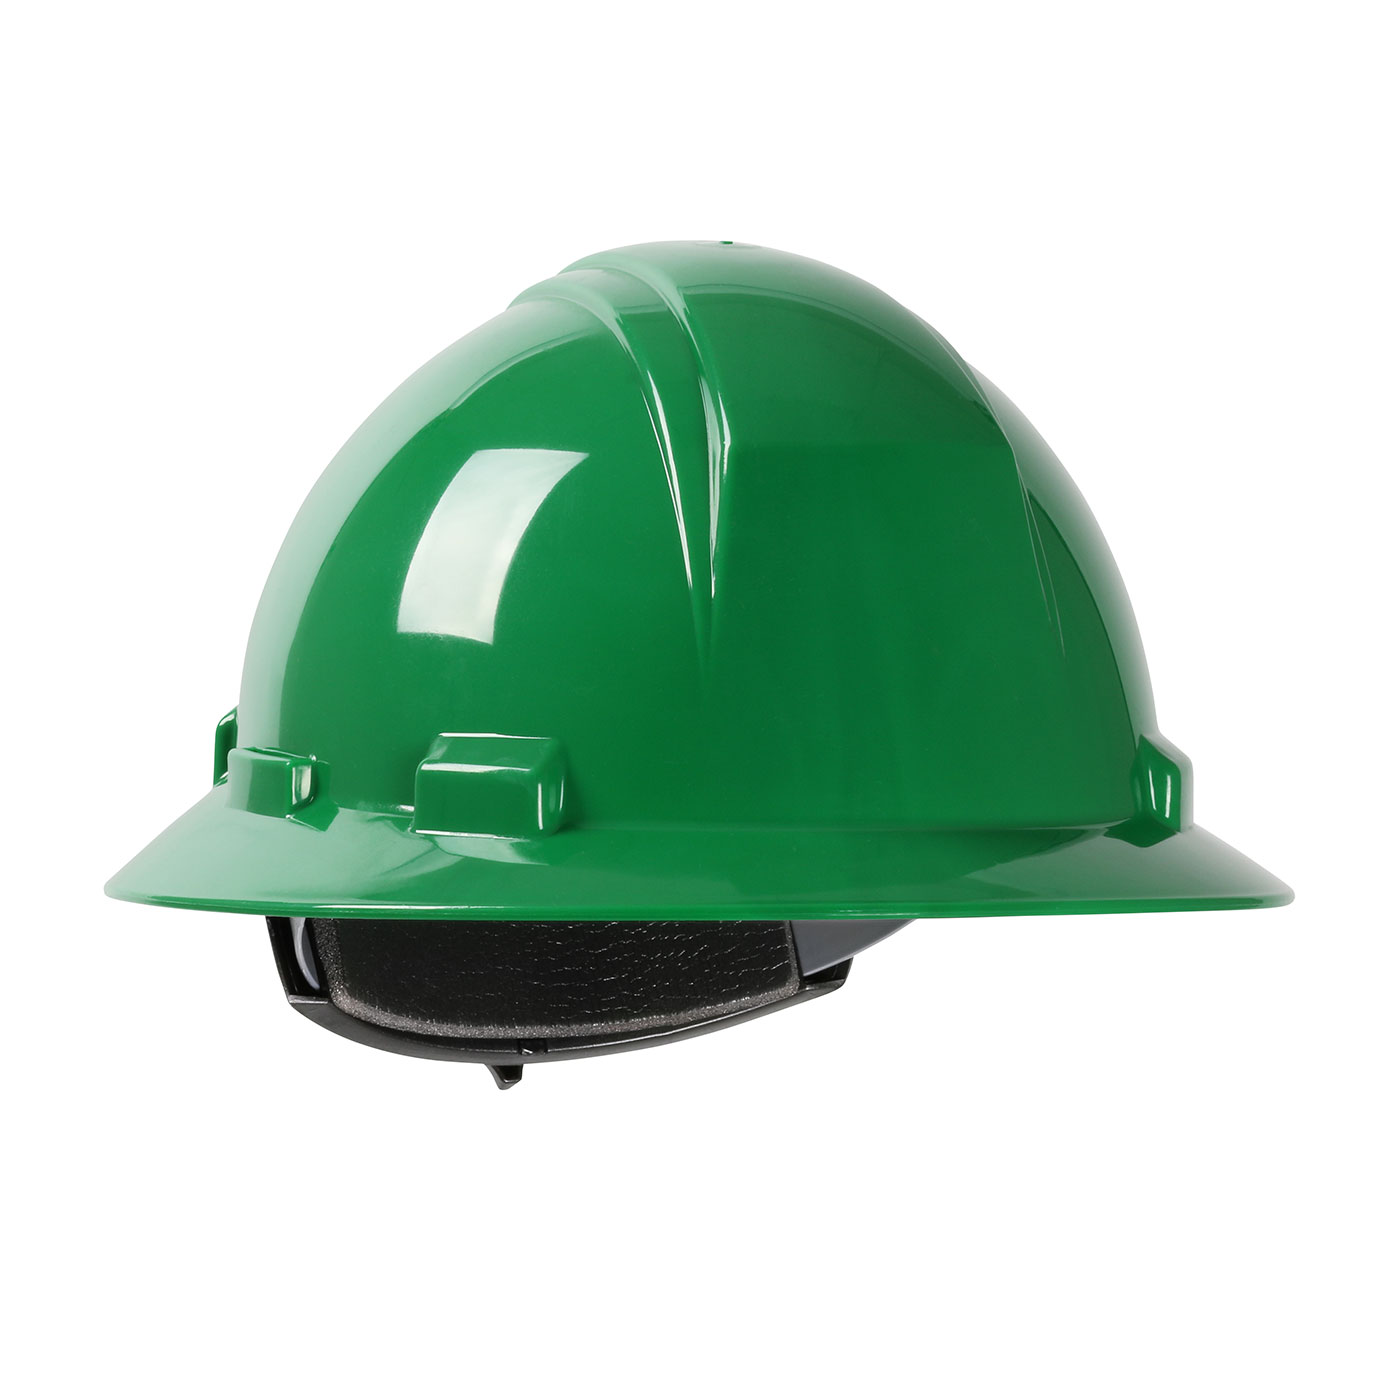 280-HP261R PIP® Dynamic Kilimanjaro™ Full Brim Hard Hat with HDPE Shell, 4-Point Textile Suspension and Wheel Ratchet Adjustment  - Green